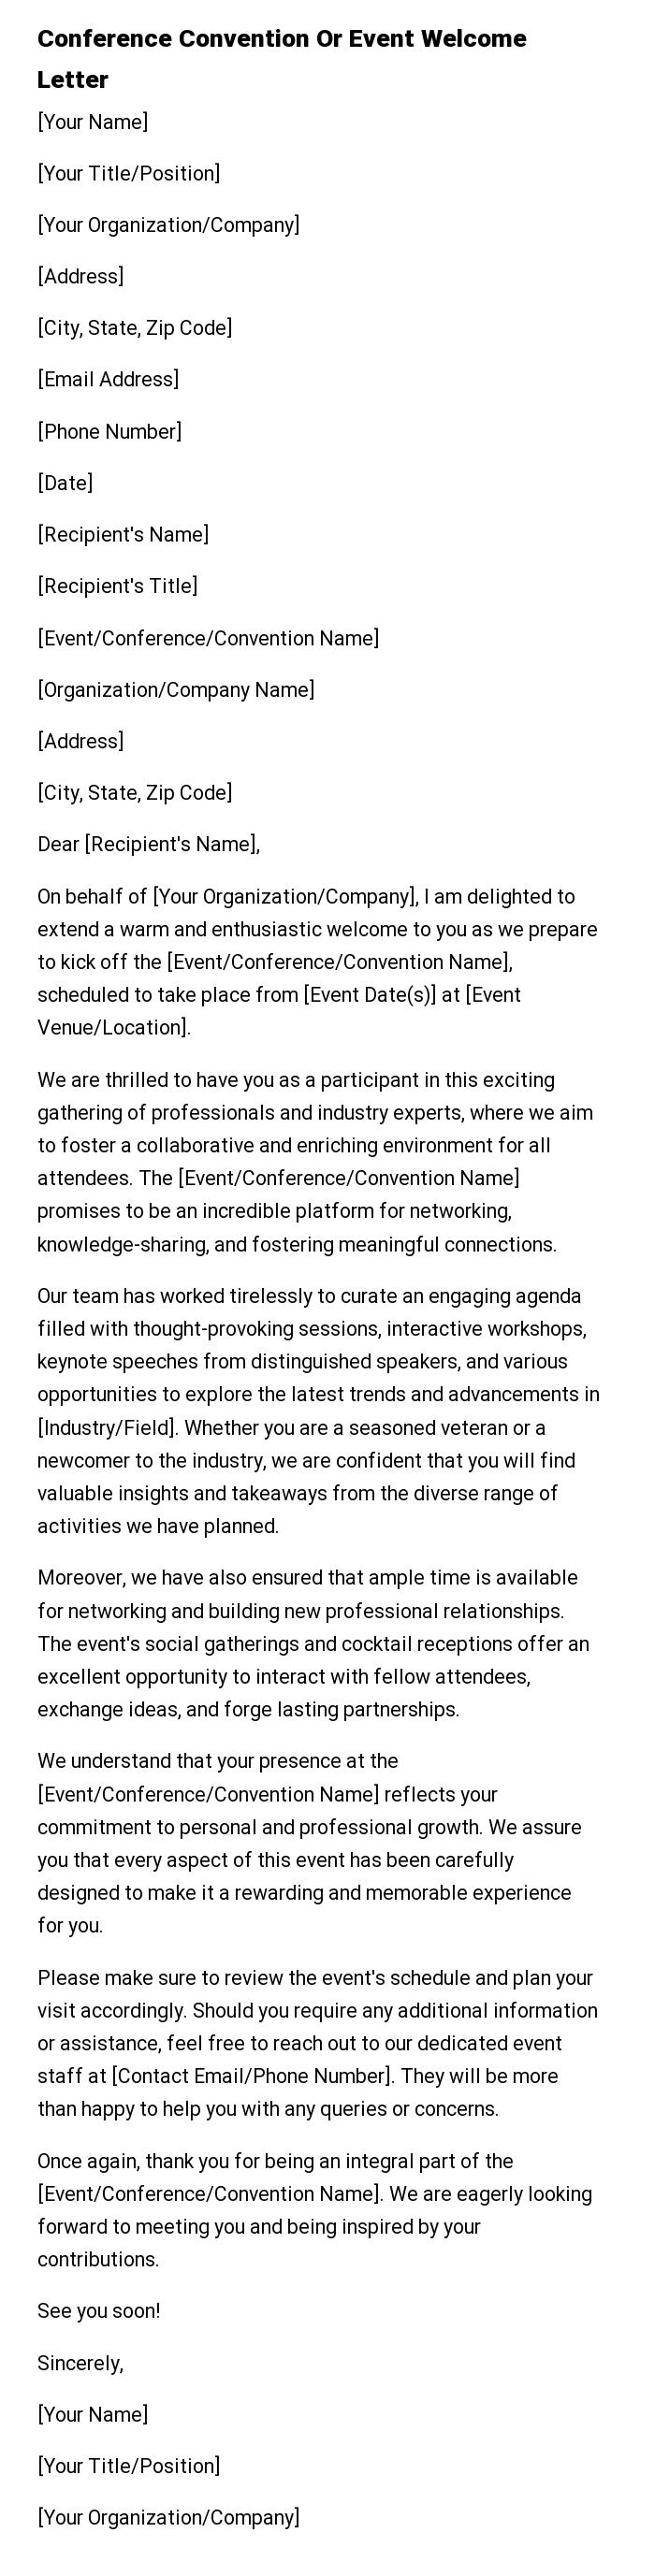 Conference Convention Or Event Welcome Letter